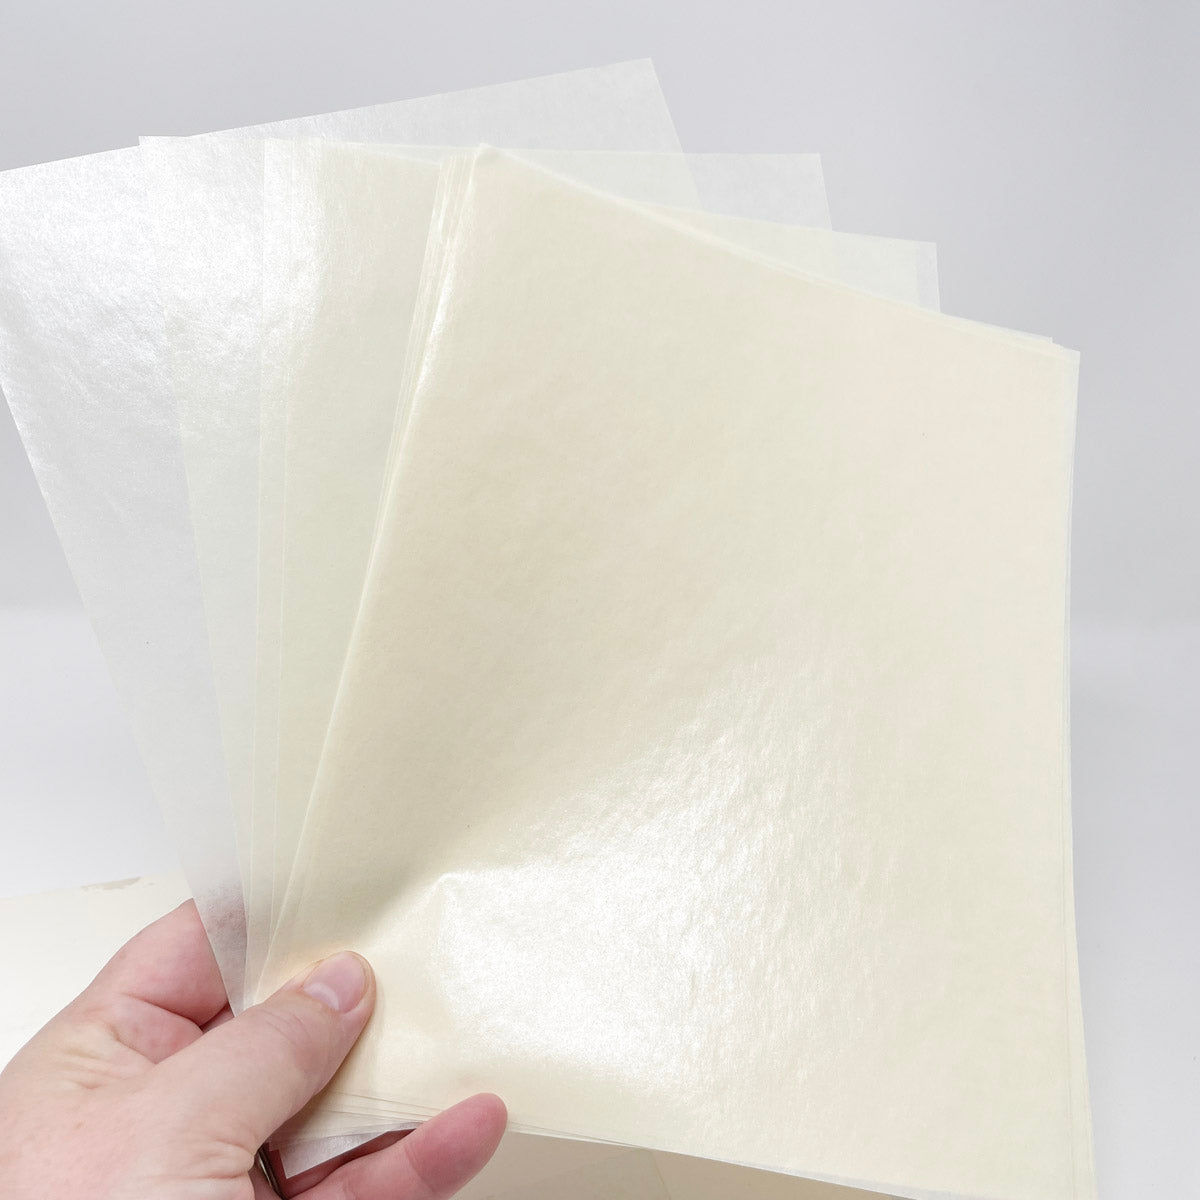 Bienfang 8" x 10" Permanent Dry Mounting Tissue